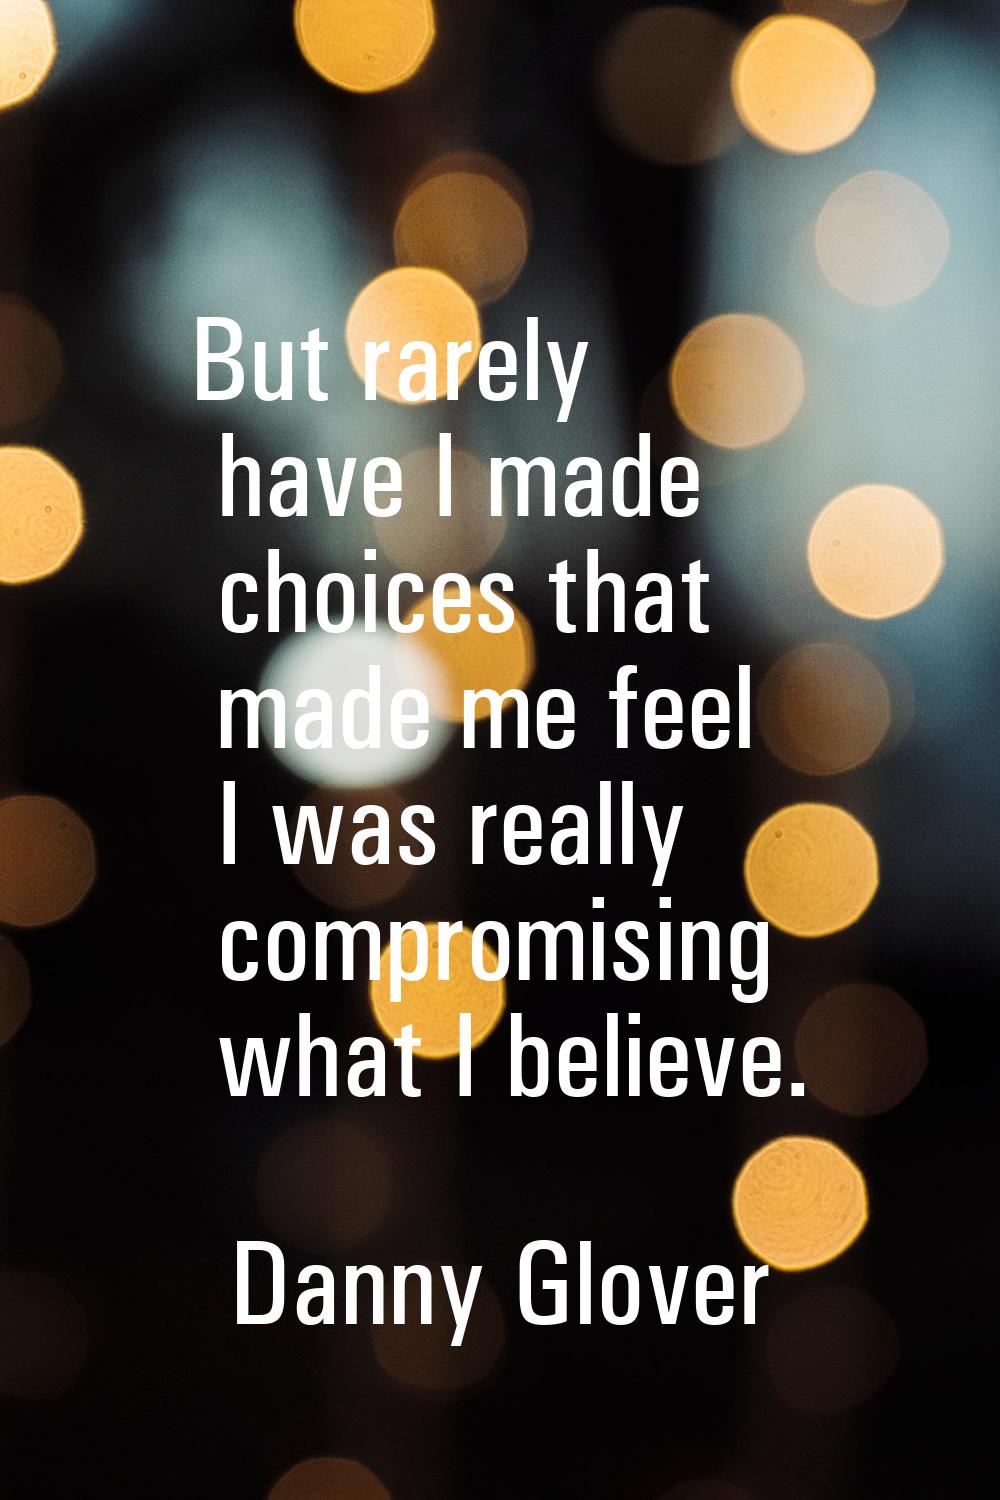 But rarely have I made choices that made me feel I was really compromising what I believe.